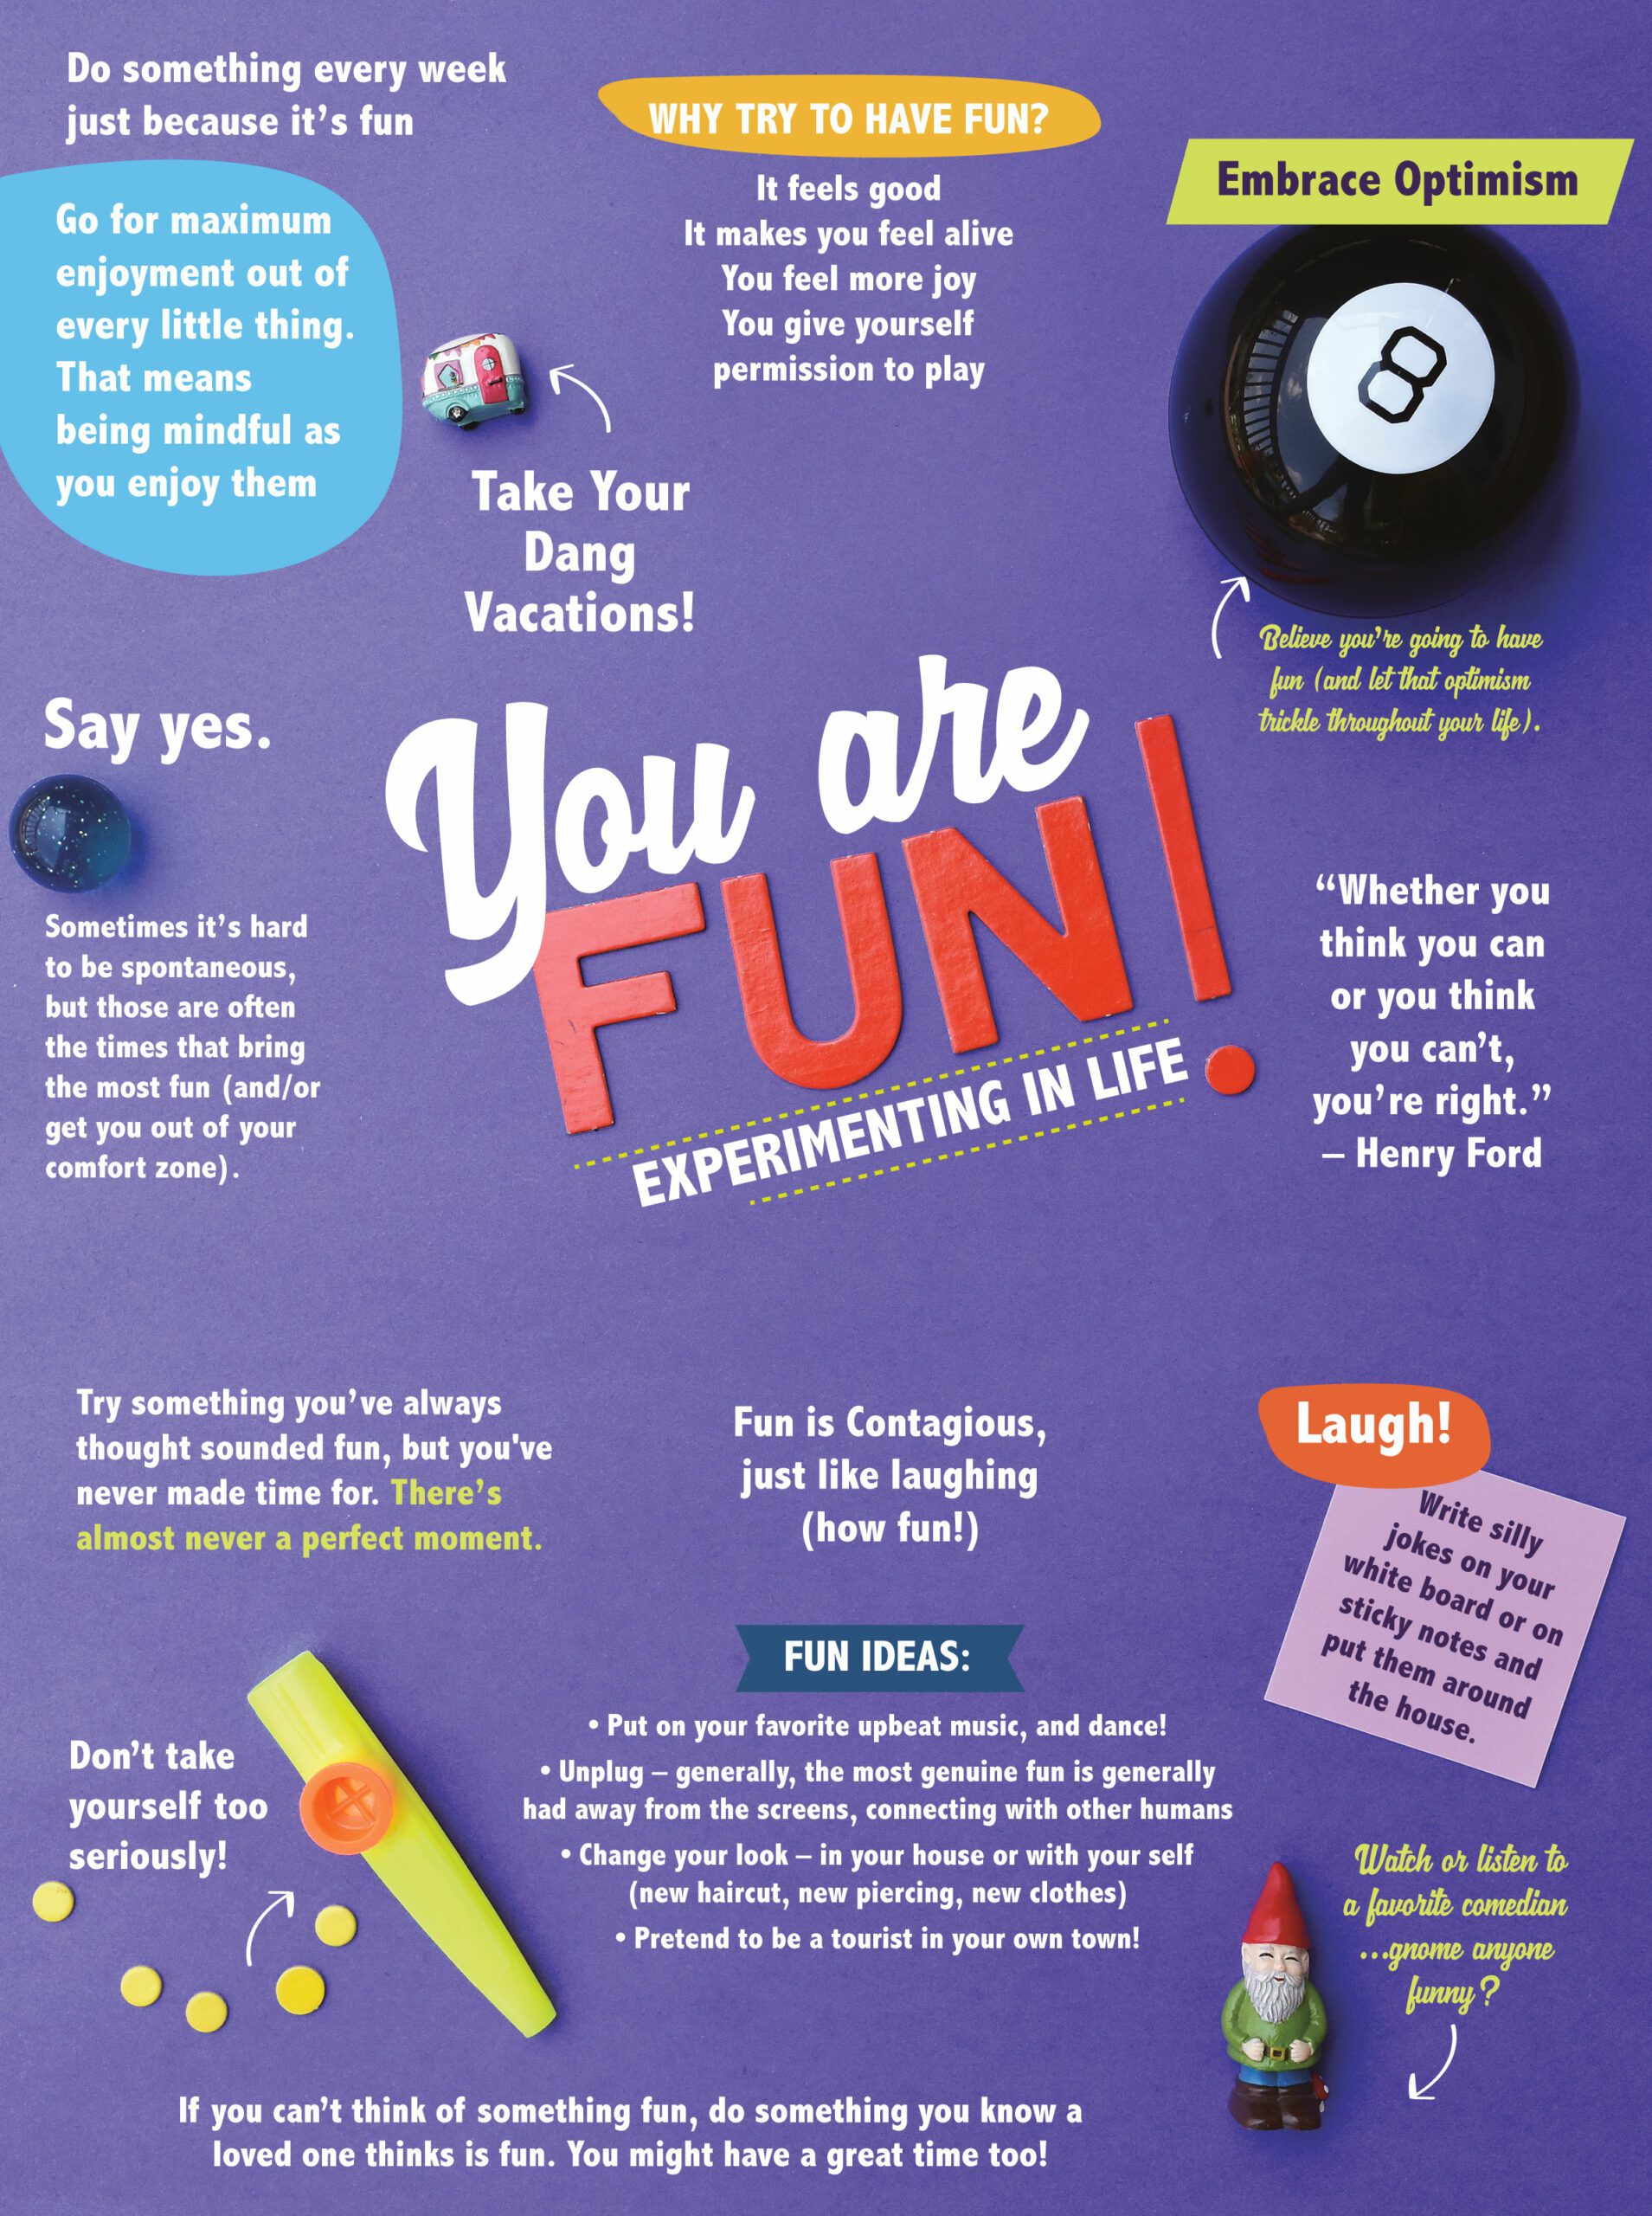 You are Fun: Experimenting in Life Infographic by Aryn Henning Nichols